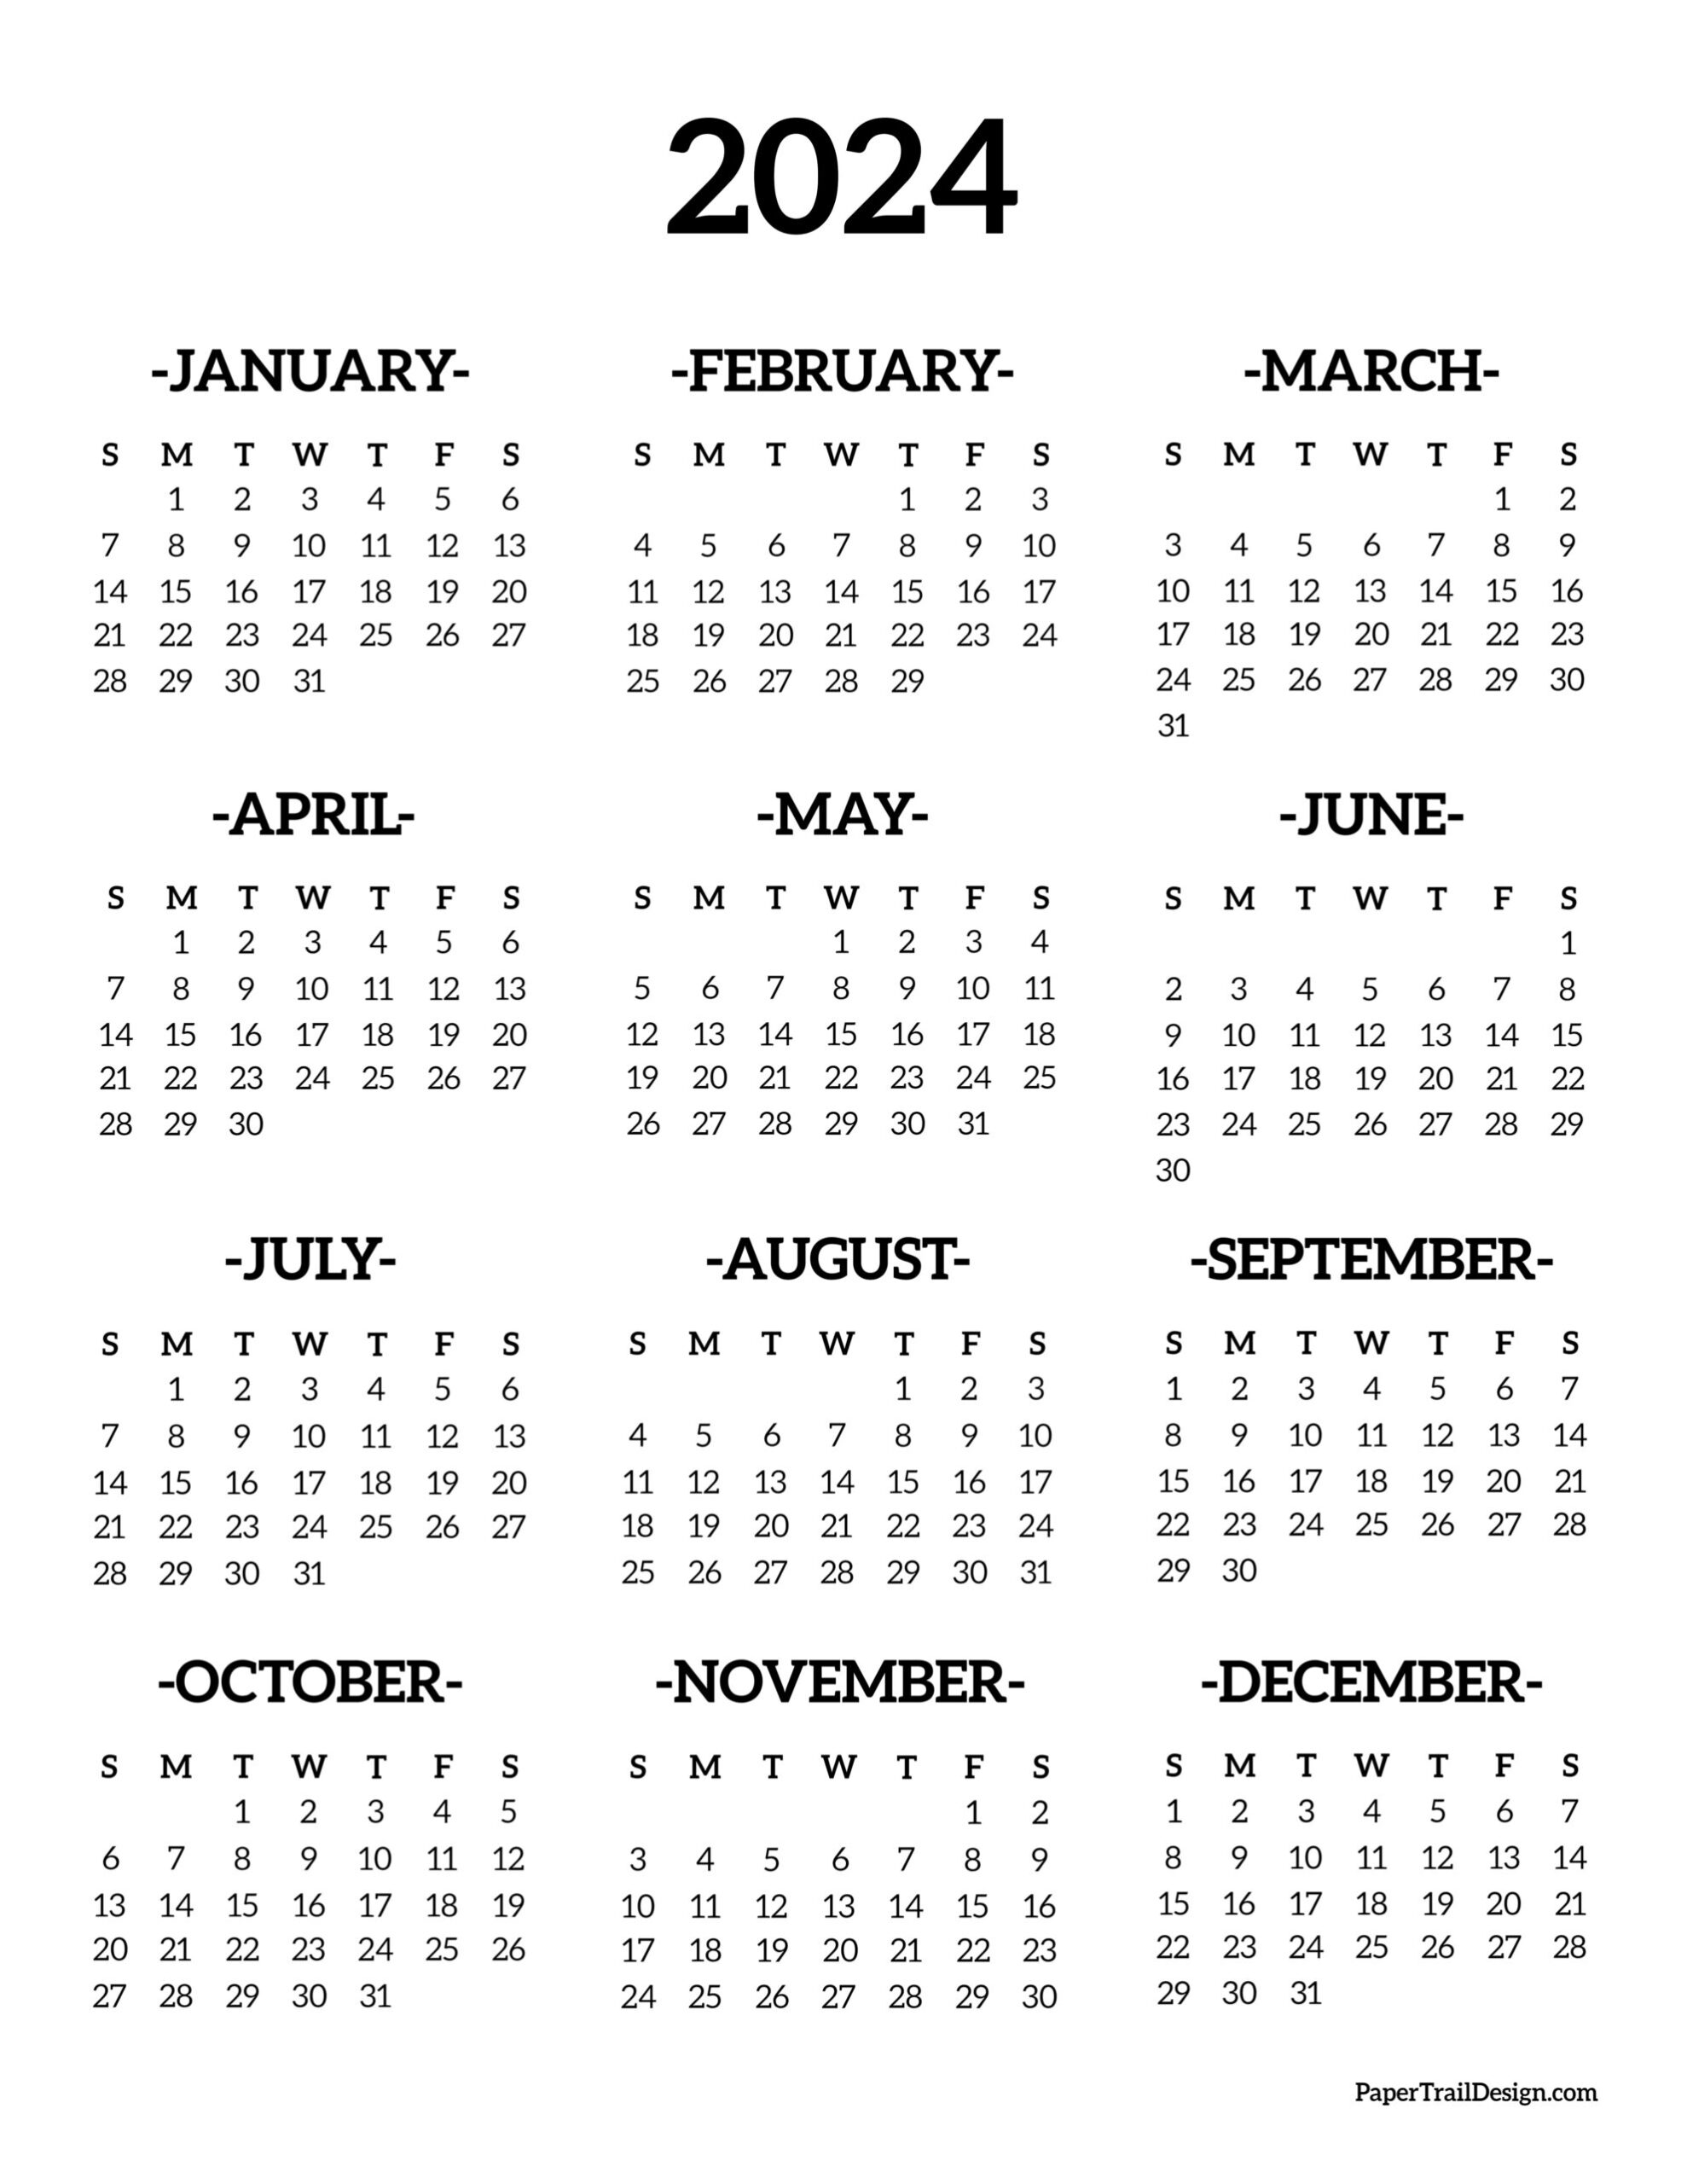 Calendar 2024 Printable One Page - Paper Trail Design for 2024 And 2024 Printable Calendar